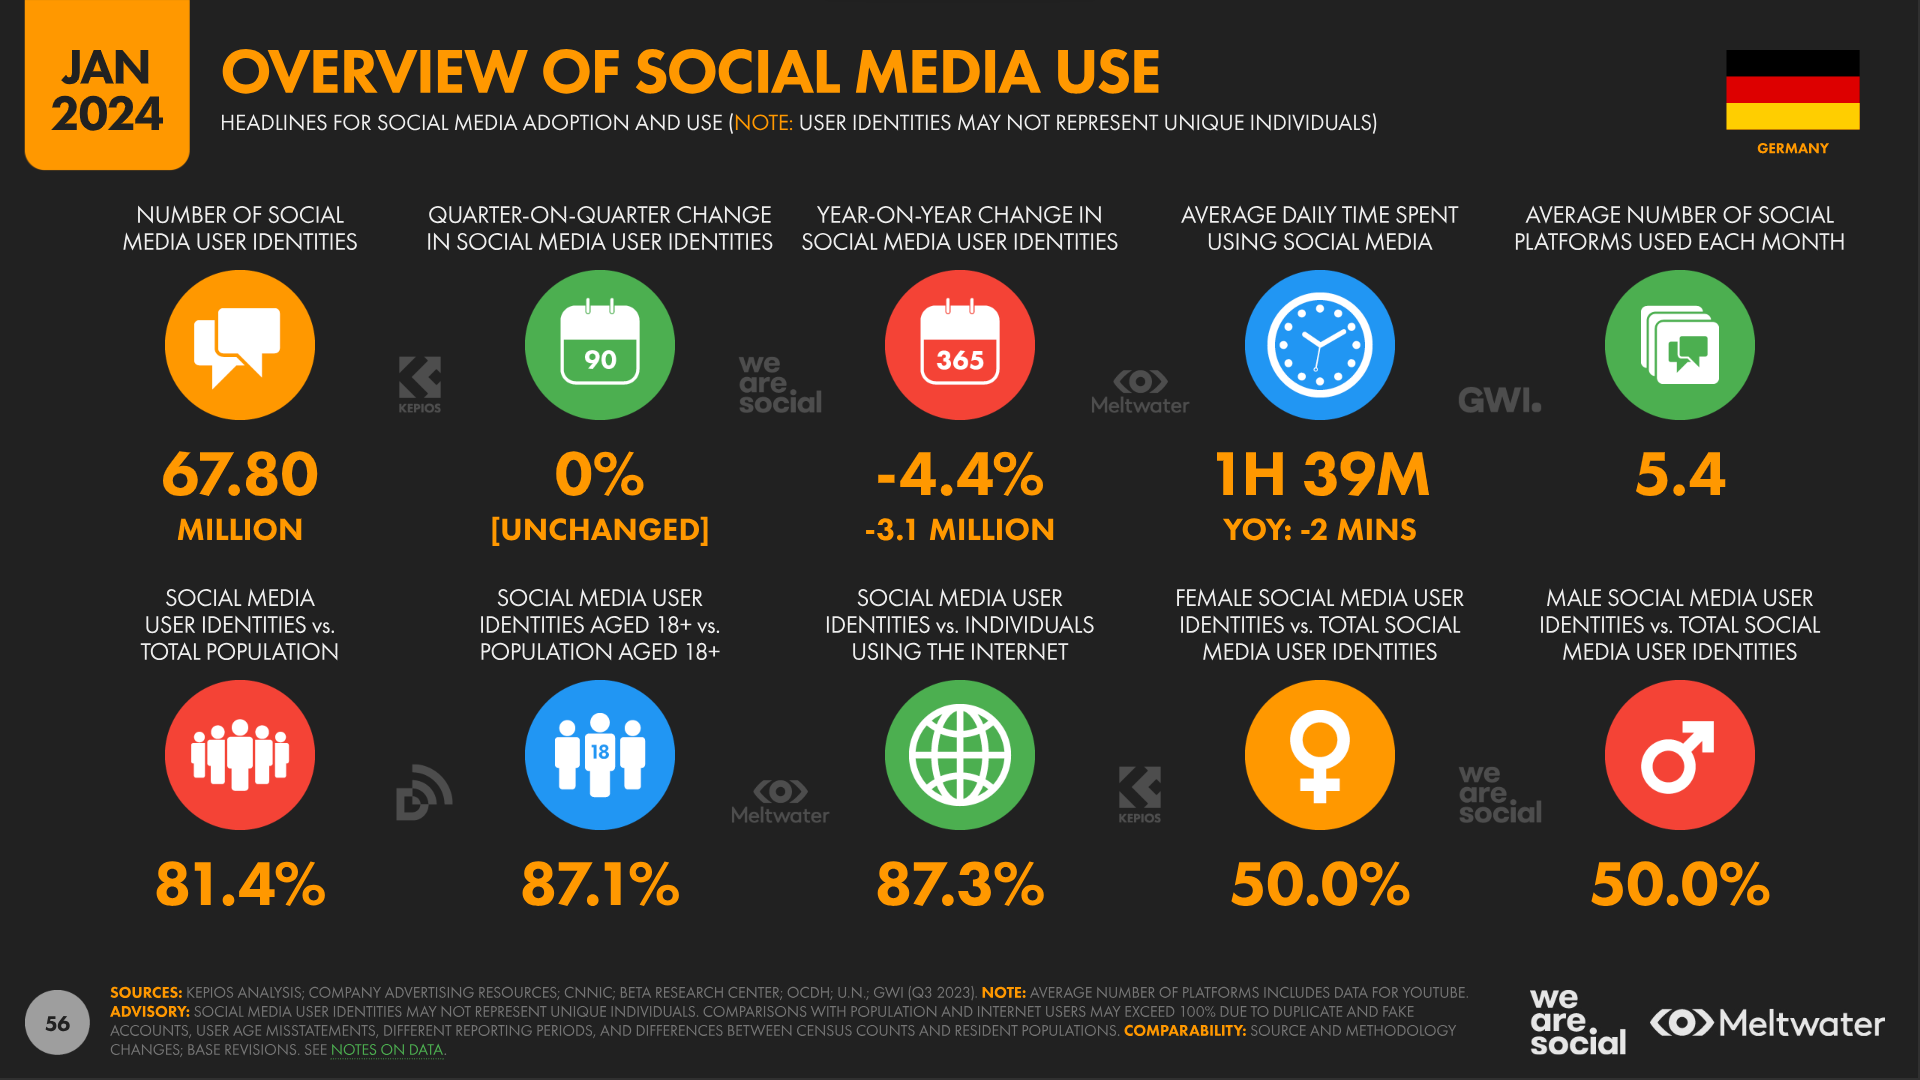 Overview social media use Germany 2024